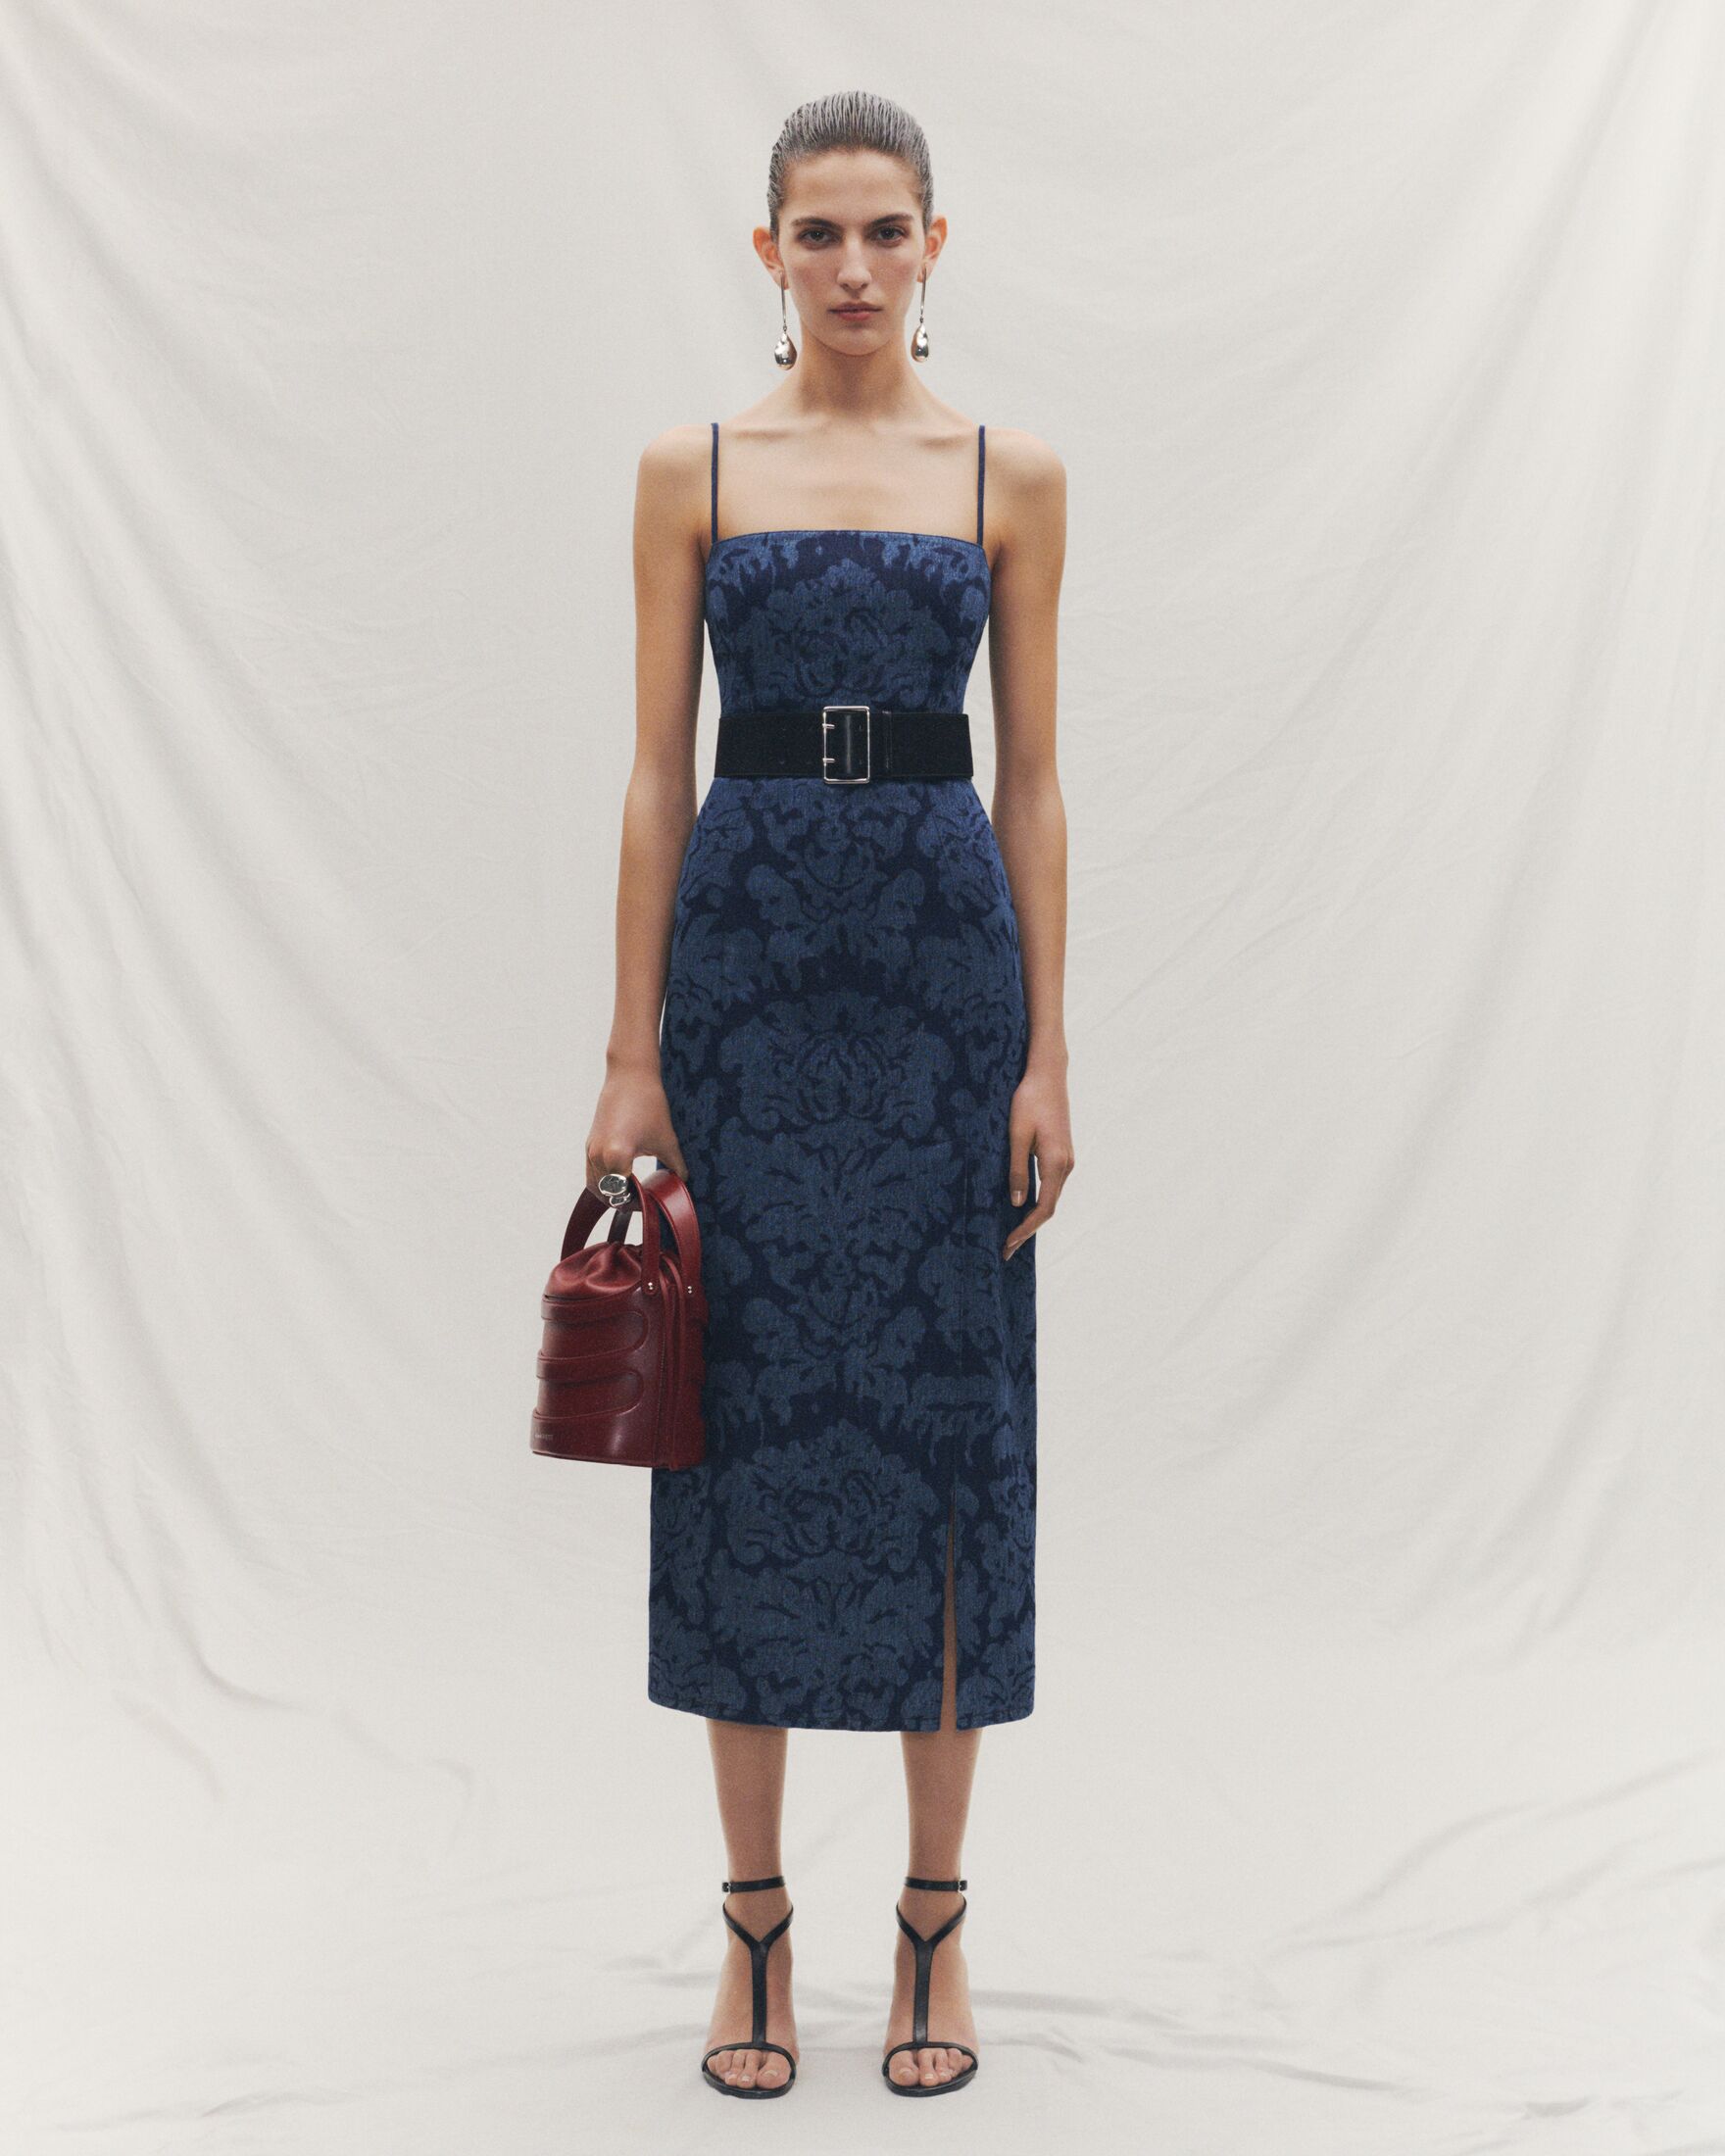 Denim midi dress with damask motif, red bucket bag and sandals